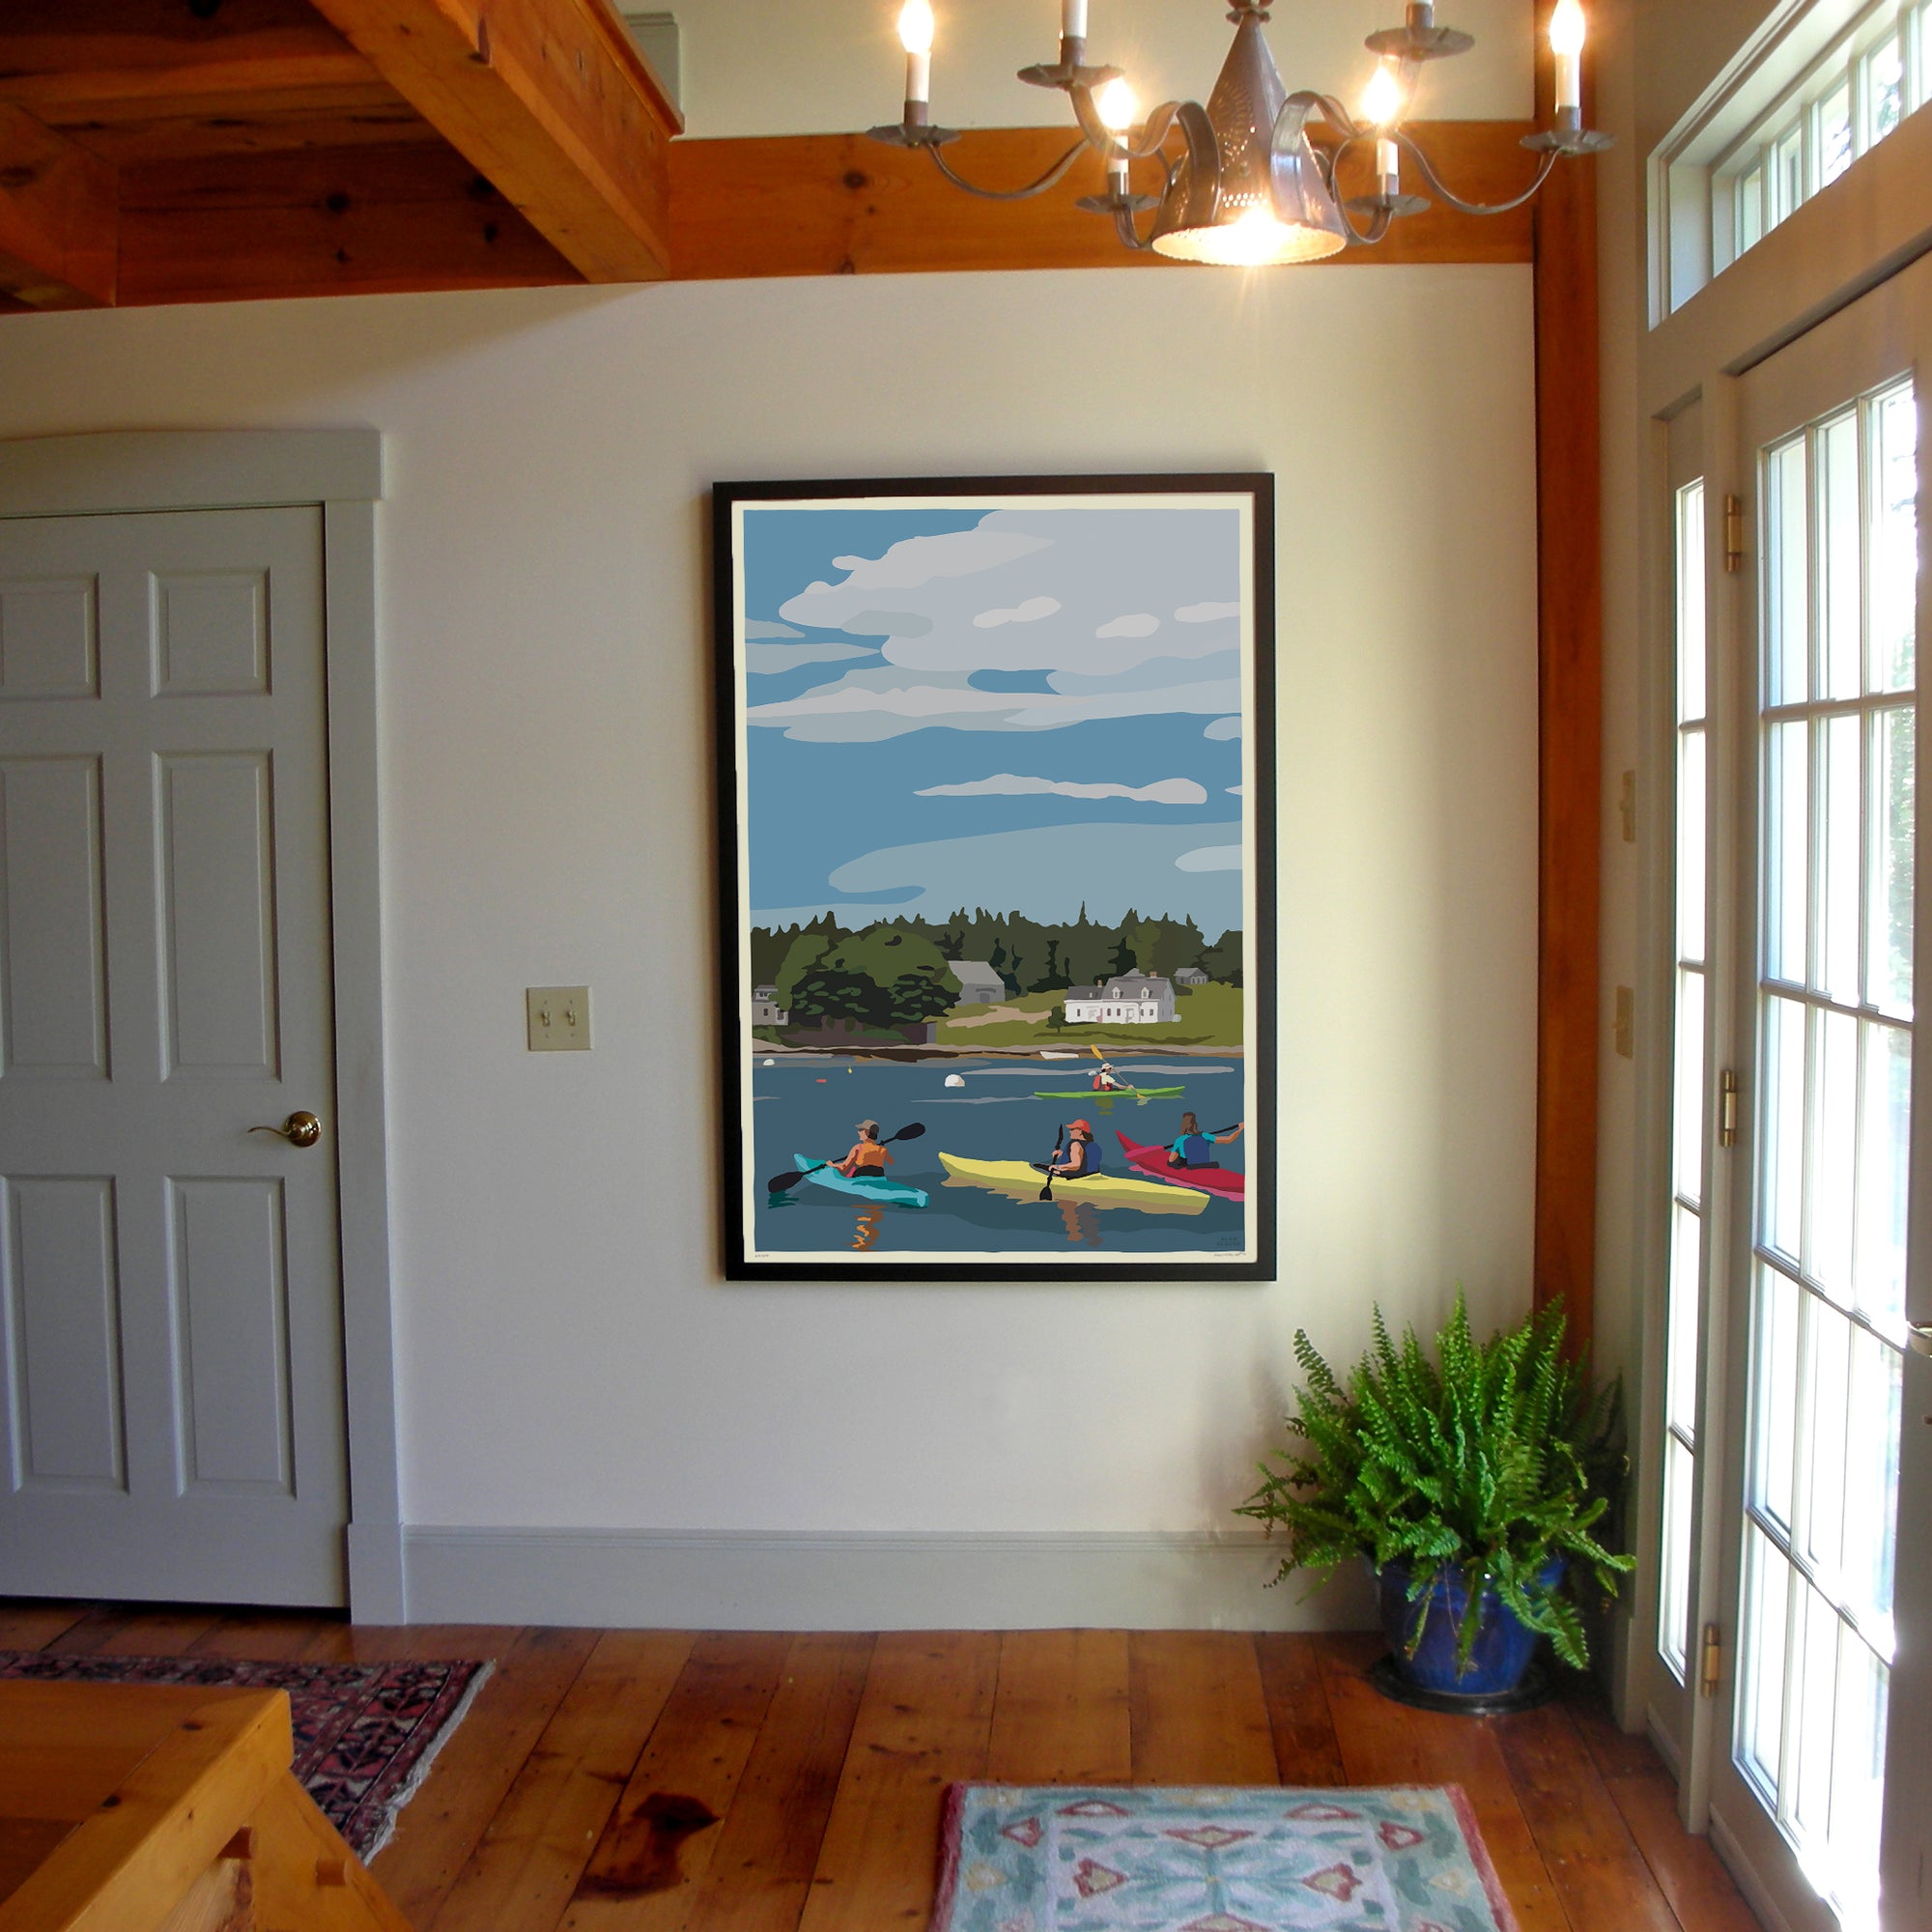 Kayaking in Port Clyde Art Print 36" x 53" Framed Wall Poster By Alan Claude - Maine